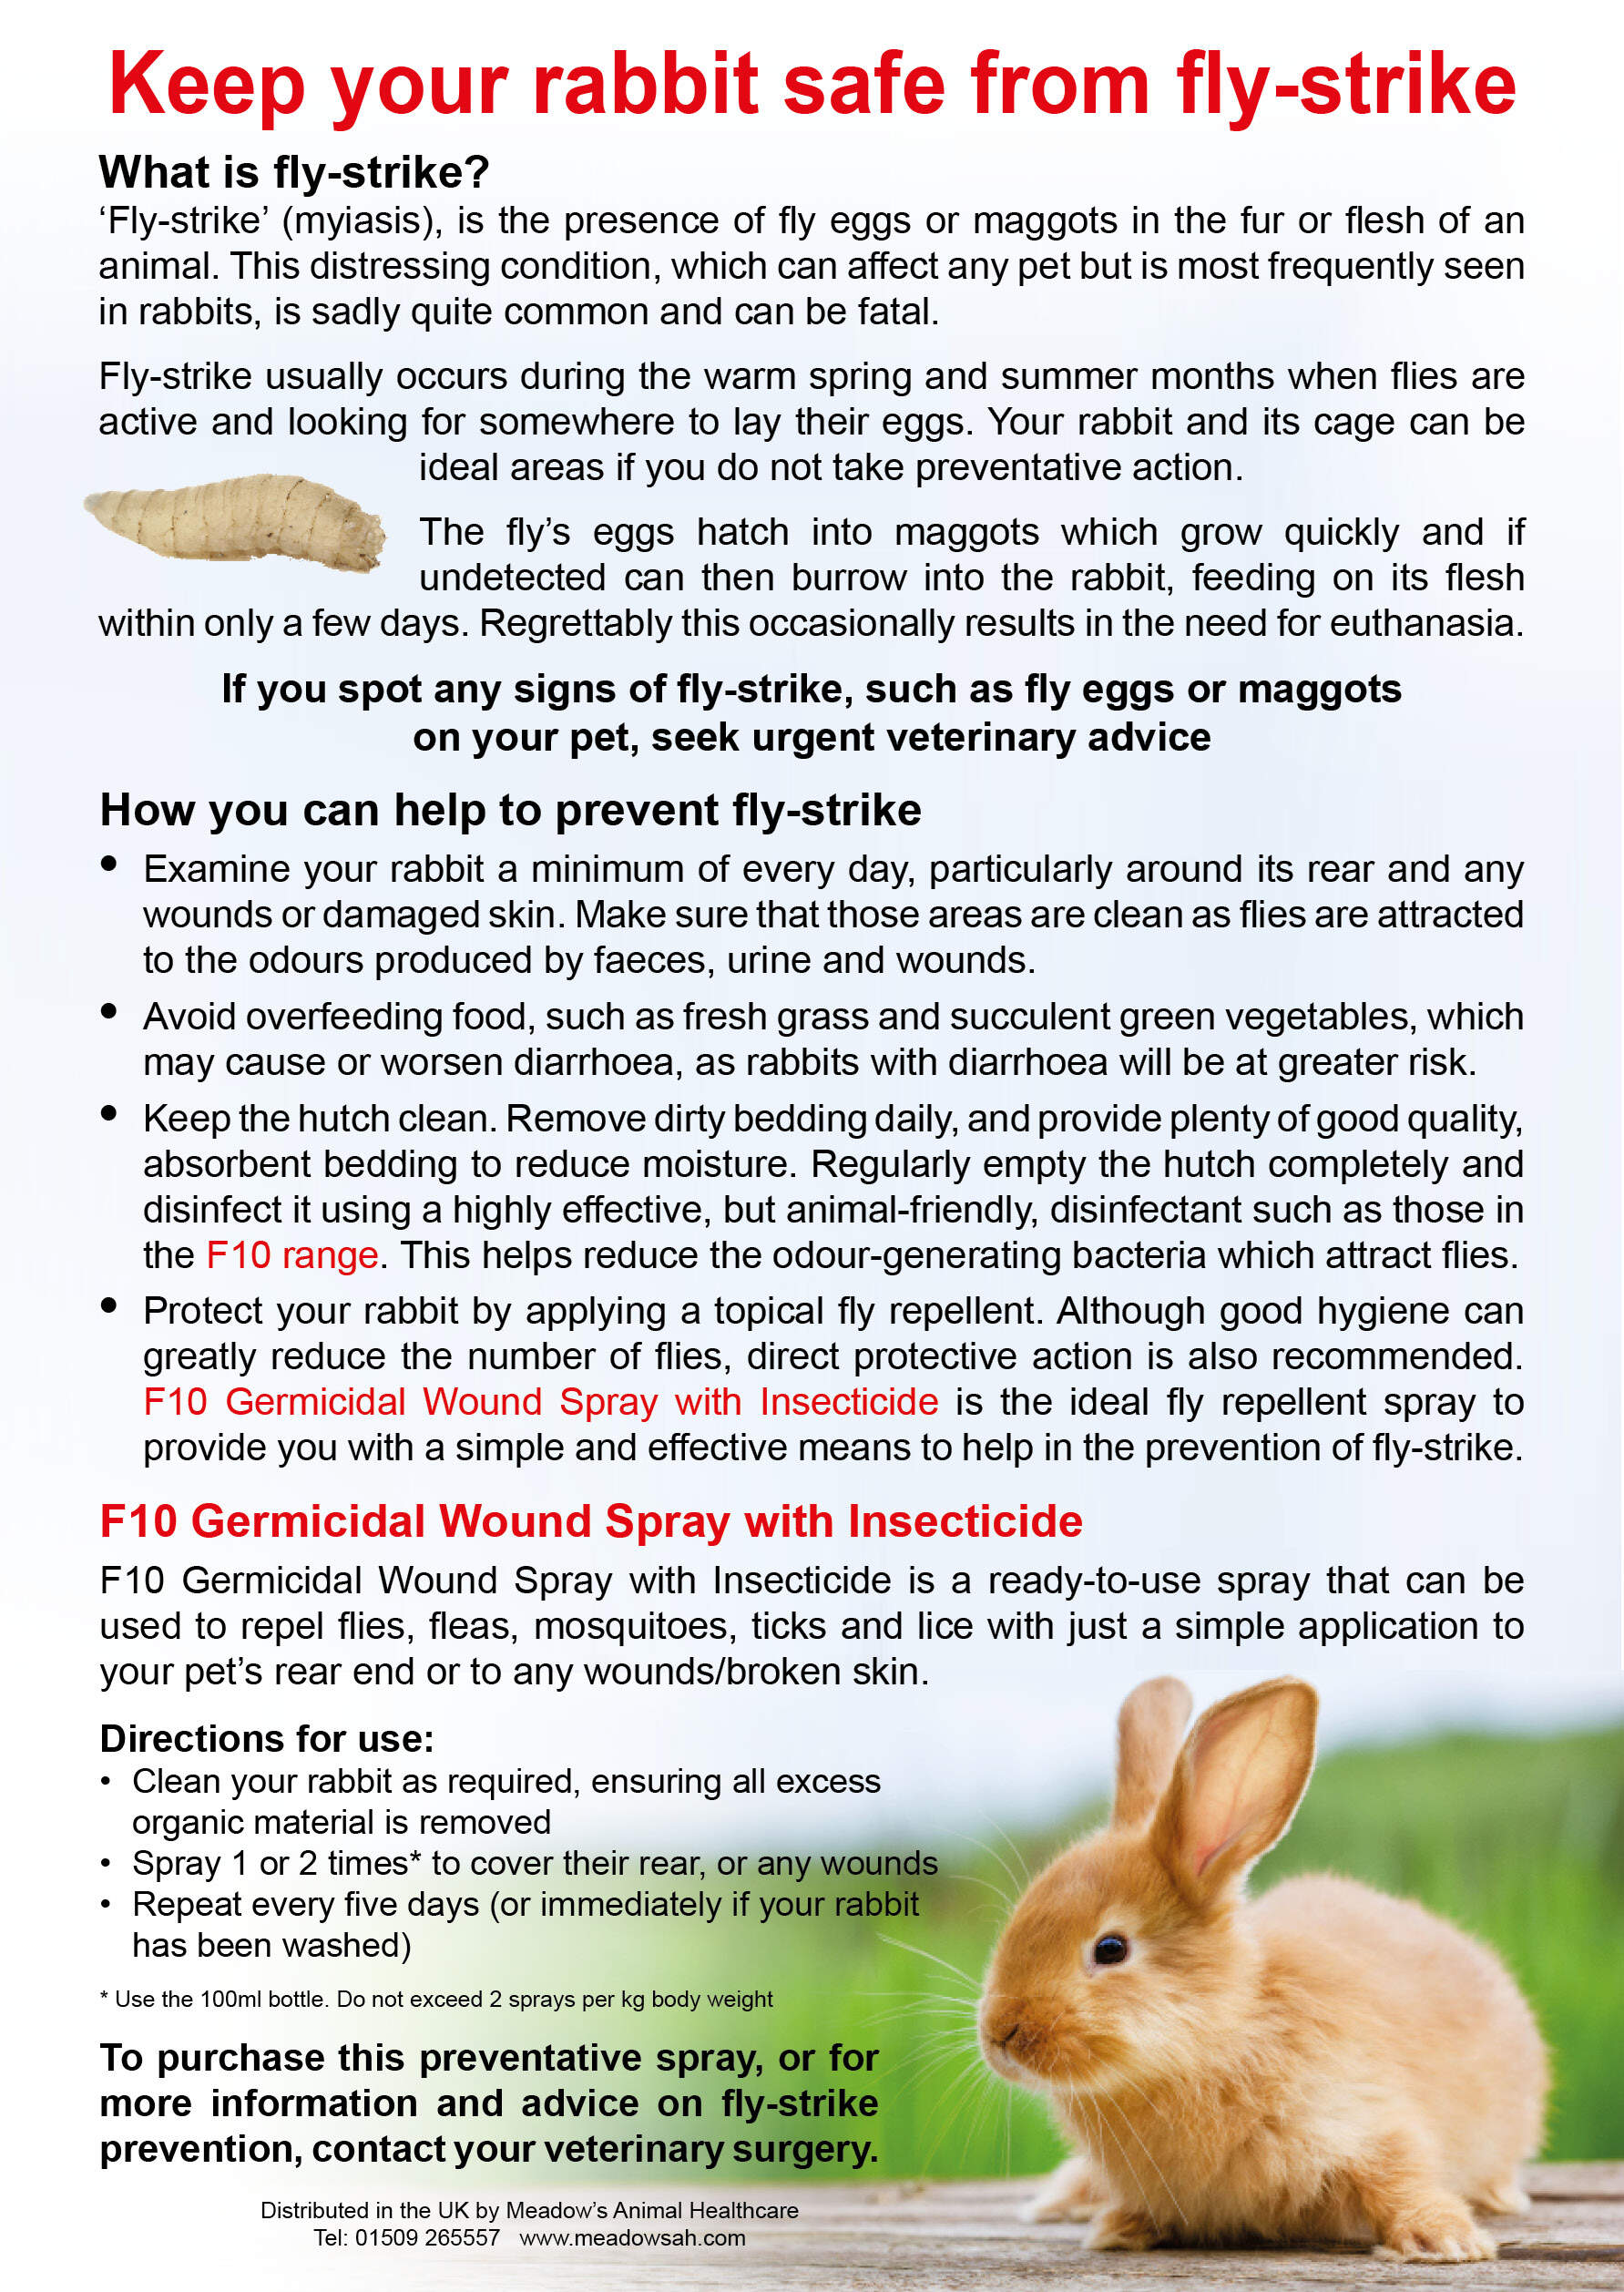 An image of the leaflet which is titled "Keep your rabbit safe from fly-strike"